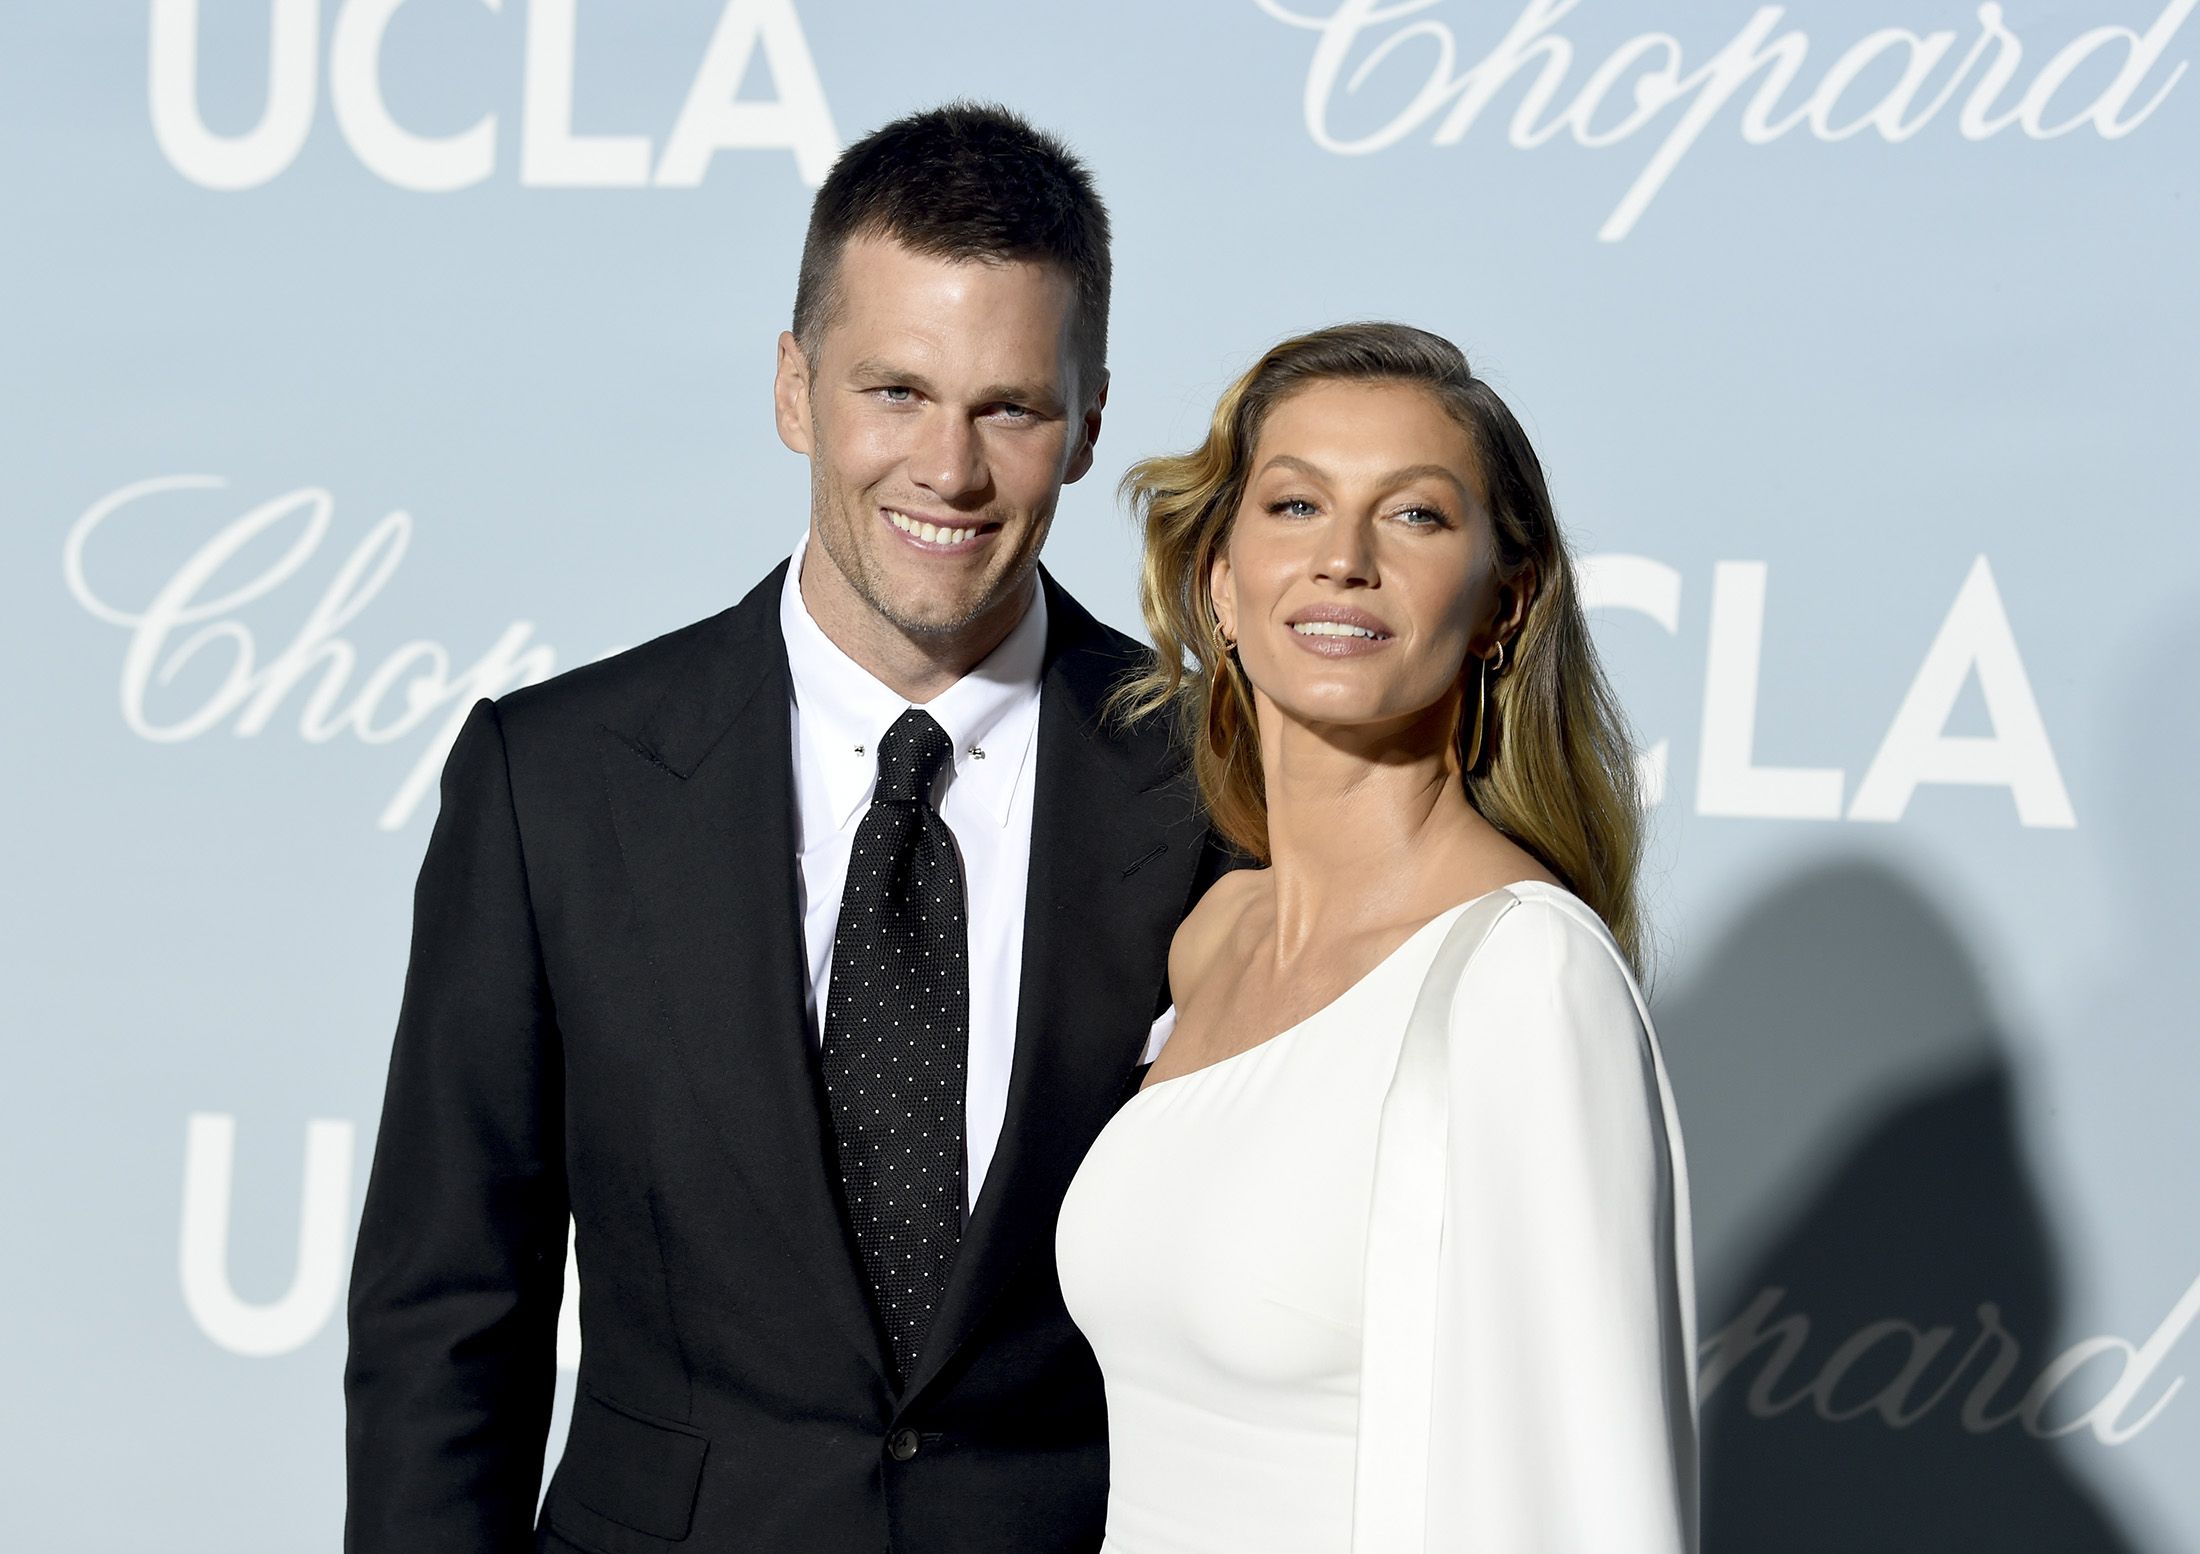 Tom Brady and Gisele Bündchen in 2019 at the Hollywood For Science Gala.